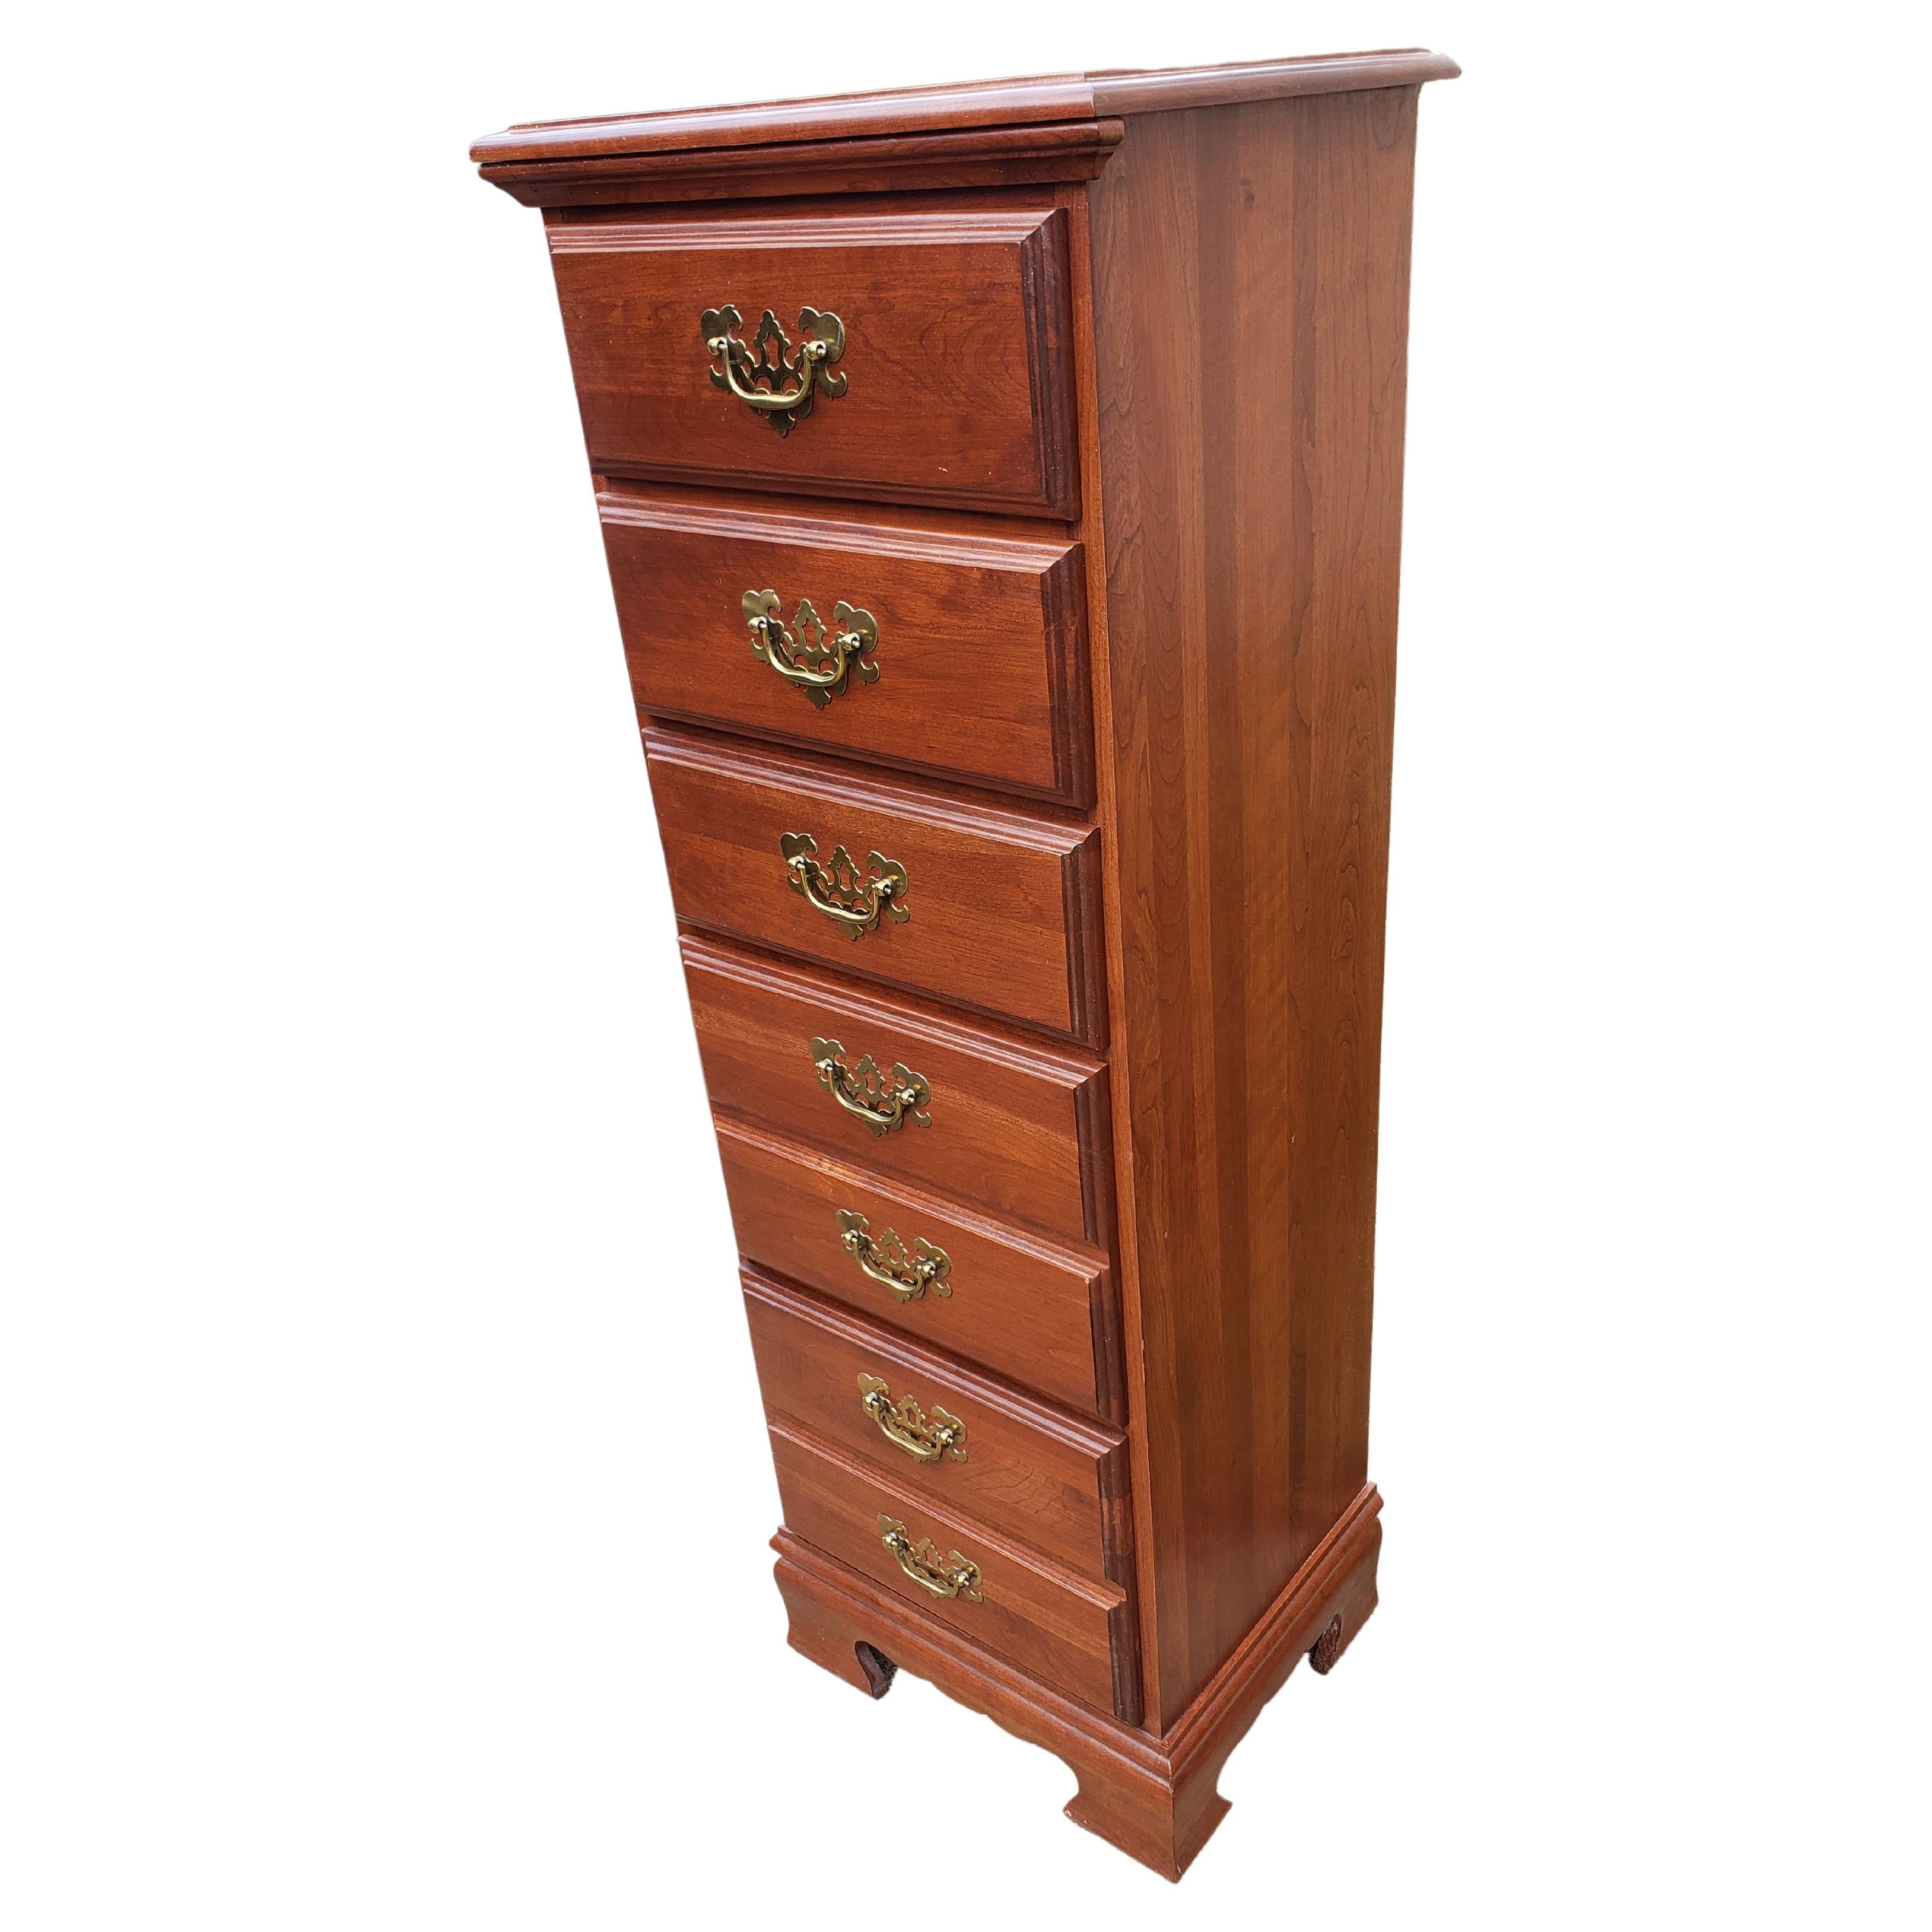 Hig quality American made, tall narrow lingerie jewelry chest of drawers.
